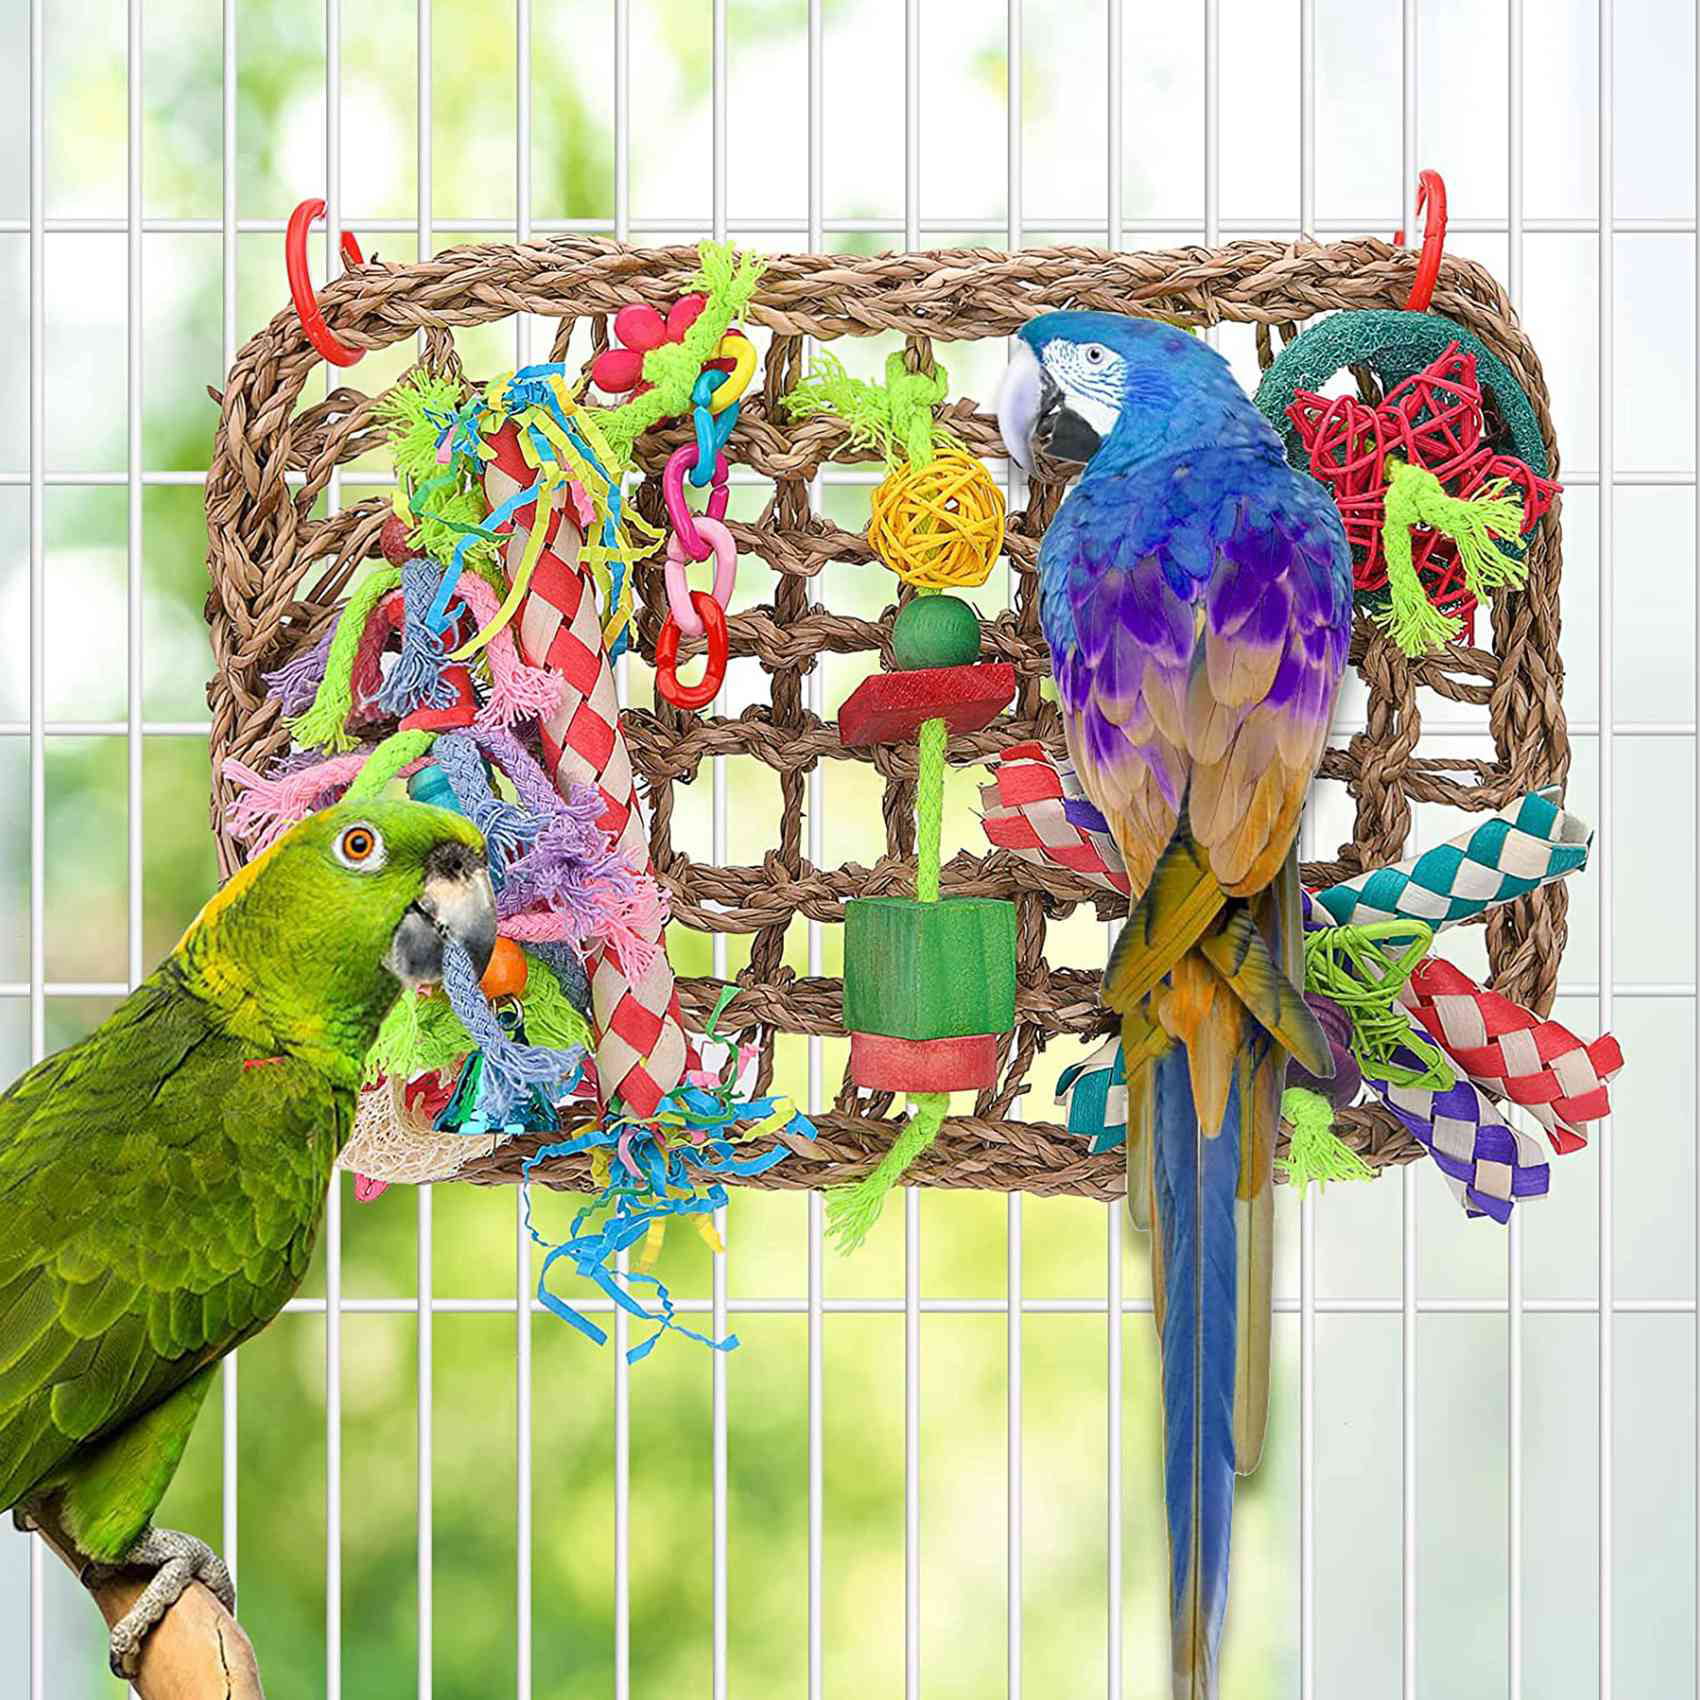 Bird Foraging Wall-Mounted Toy Natural Edible Seaweed Woven Climbing Hammock Toy with Colorful Shredded Toys for Small and Medium-Sized Birds Foraging Toys Parrots Cockatiels Hiziwimi Bird Chew Toy 